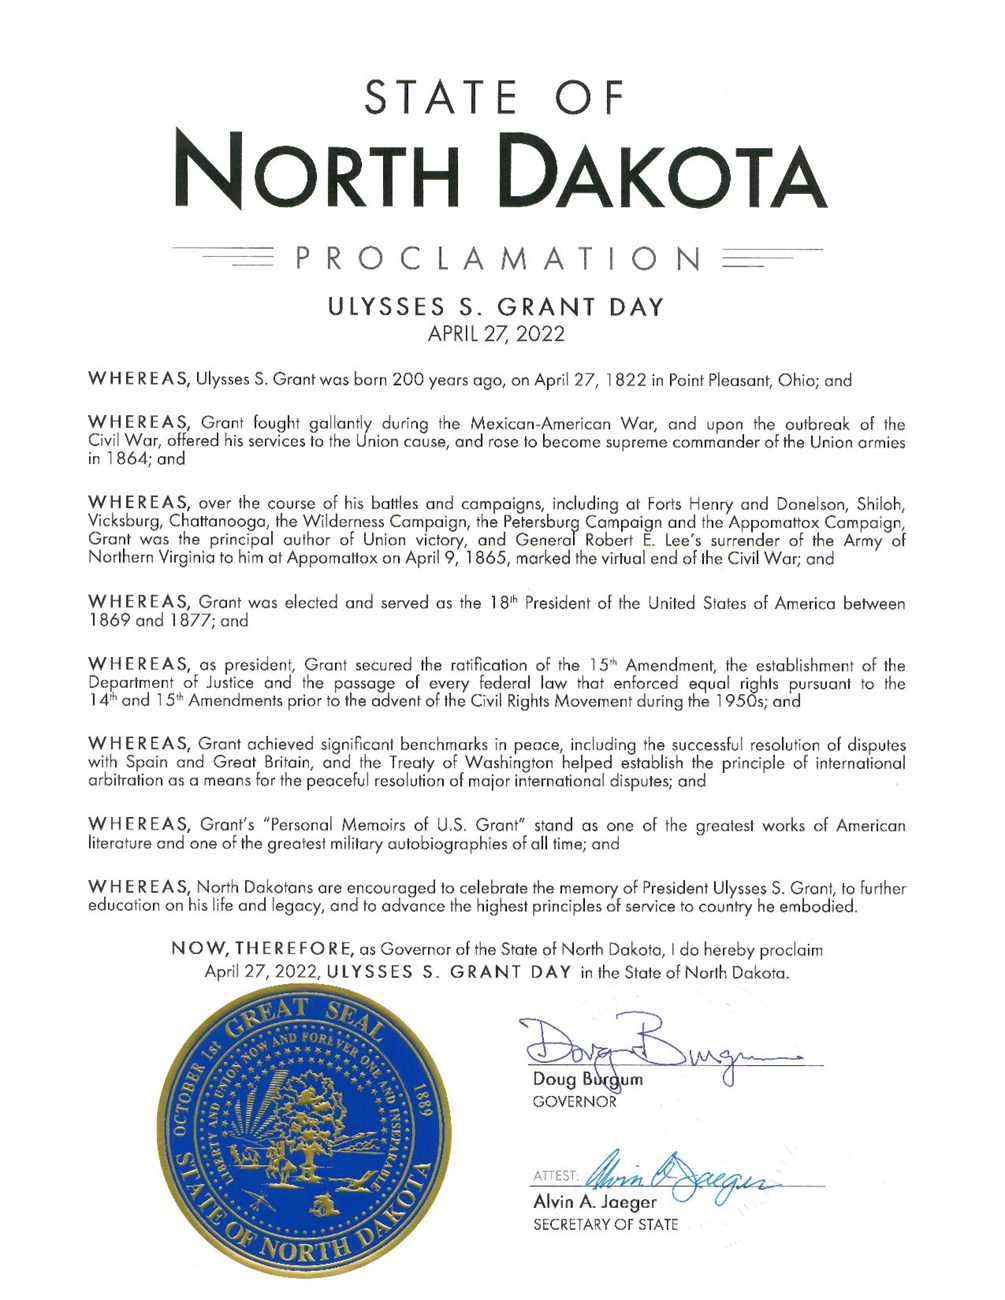 Message from North Dakota honoring Ulysses S Grant's 200th birthday. The State seal of North Dakota is impressed in blue in the bottom left hand corner of the page.